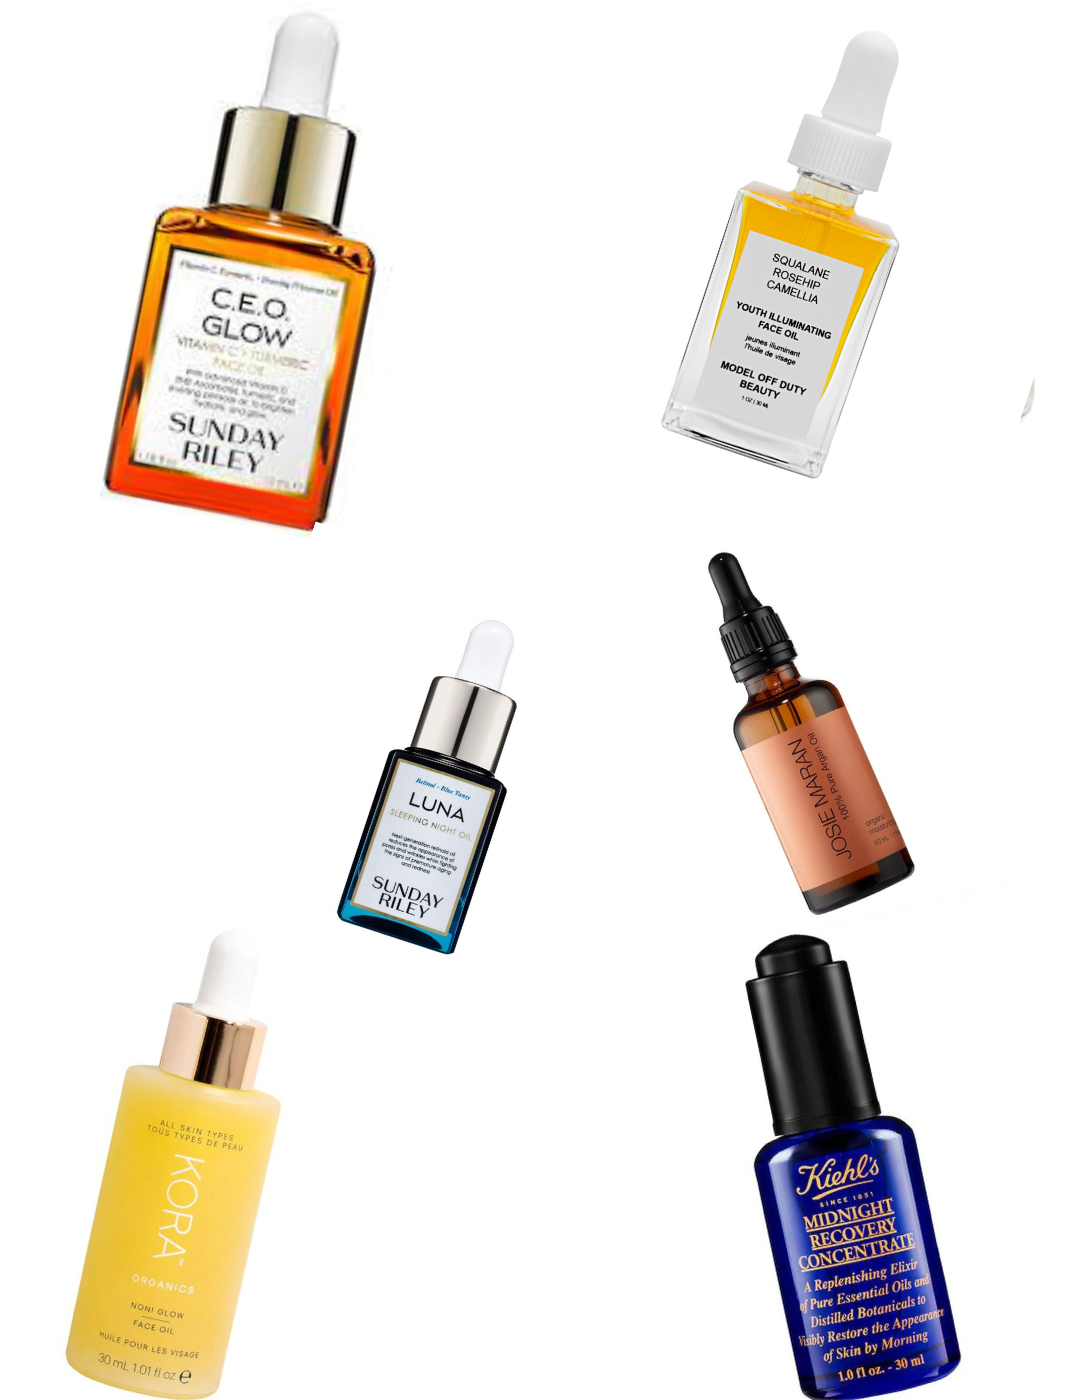 Sunday Riley C.E.O. Glow Vitamin C & Turmeric Face Oil Reviews. Is it worth it?